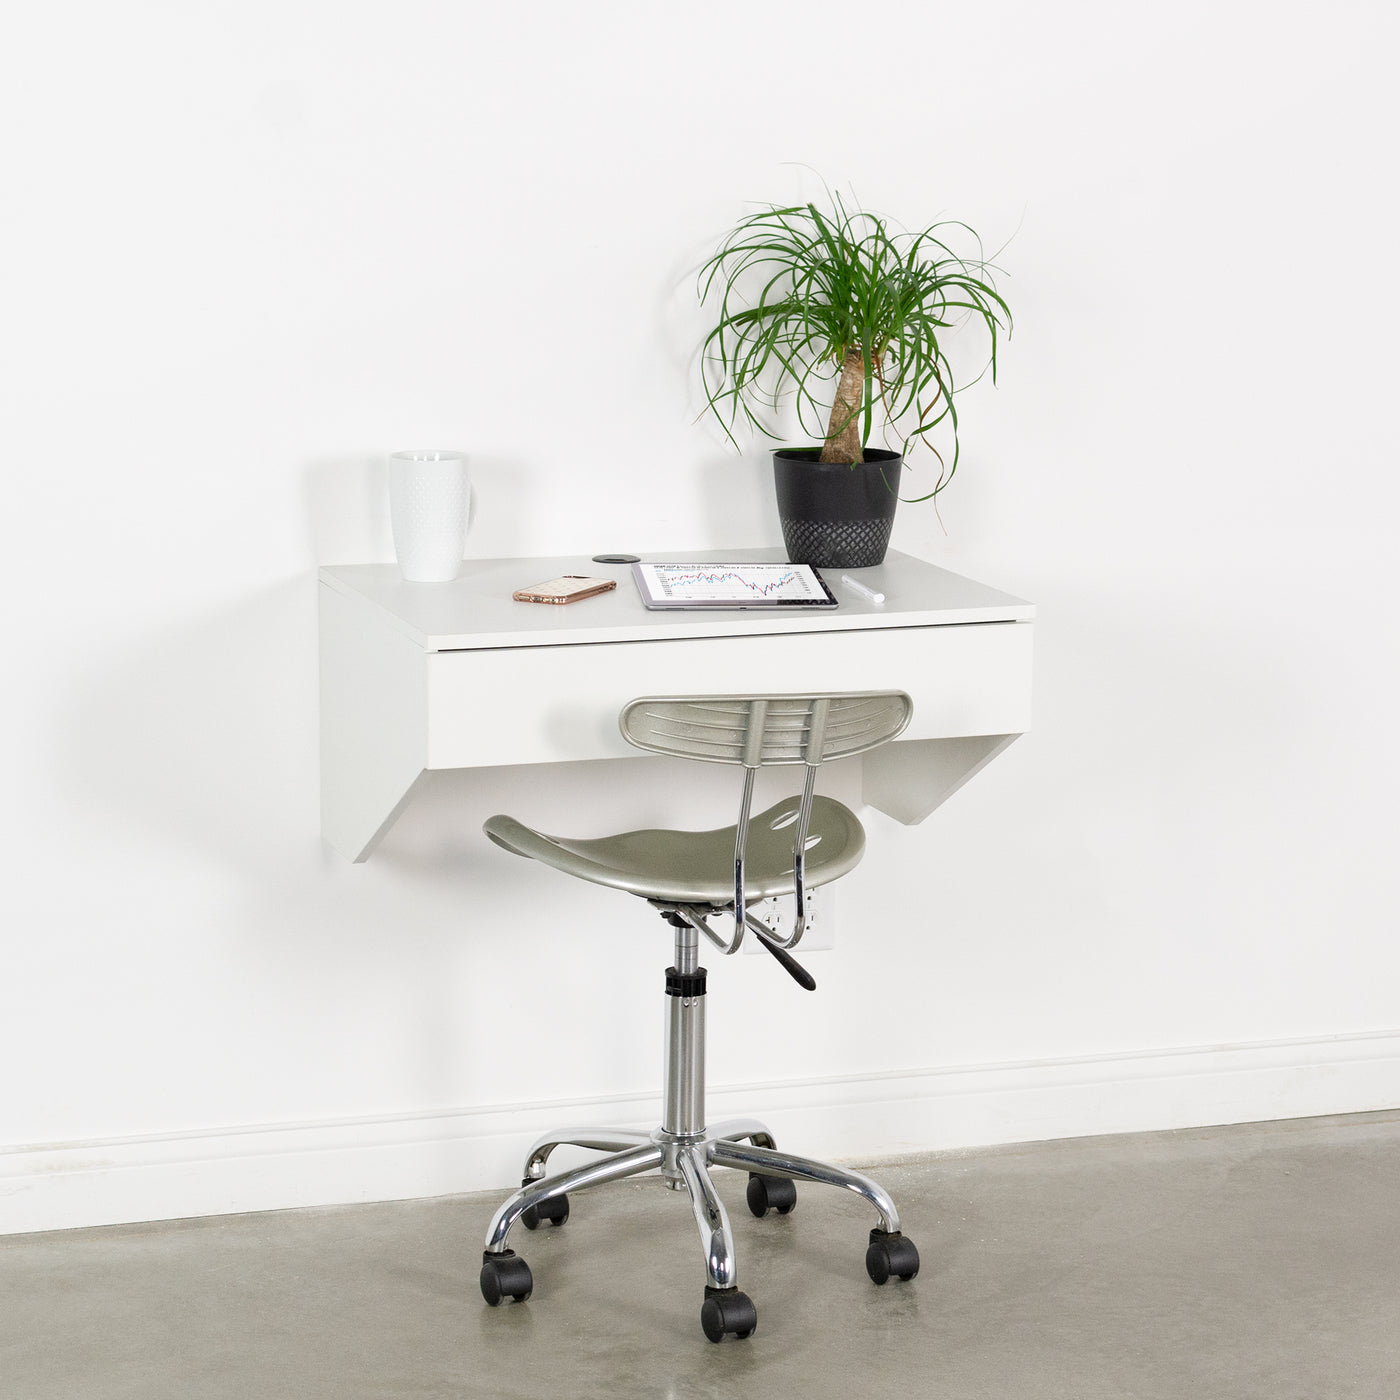 Sturdy wall mount desk with drawer for home or office.